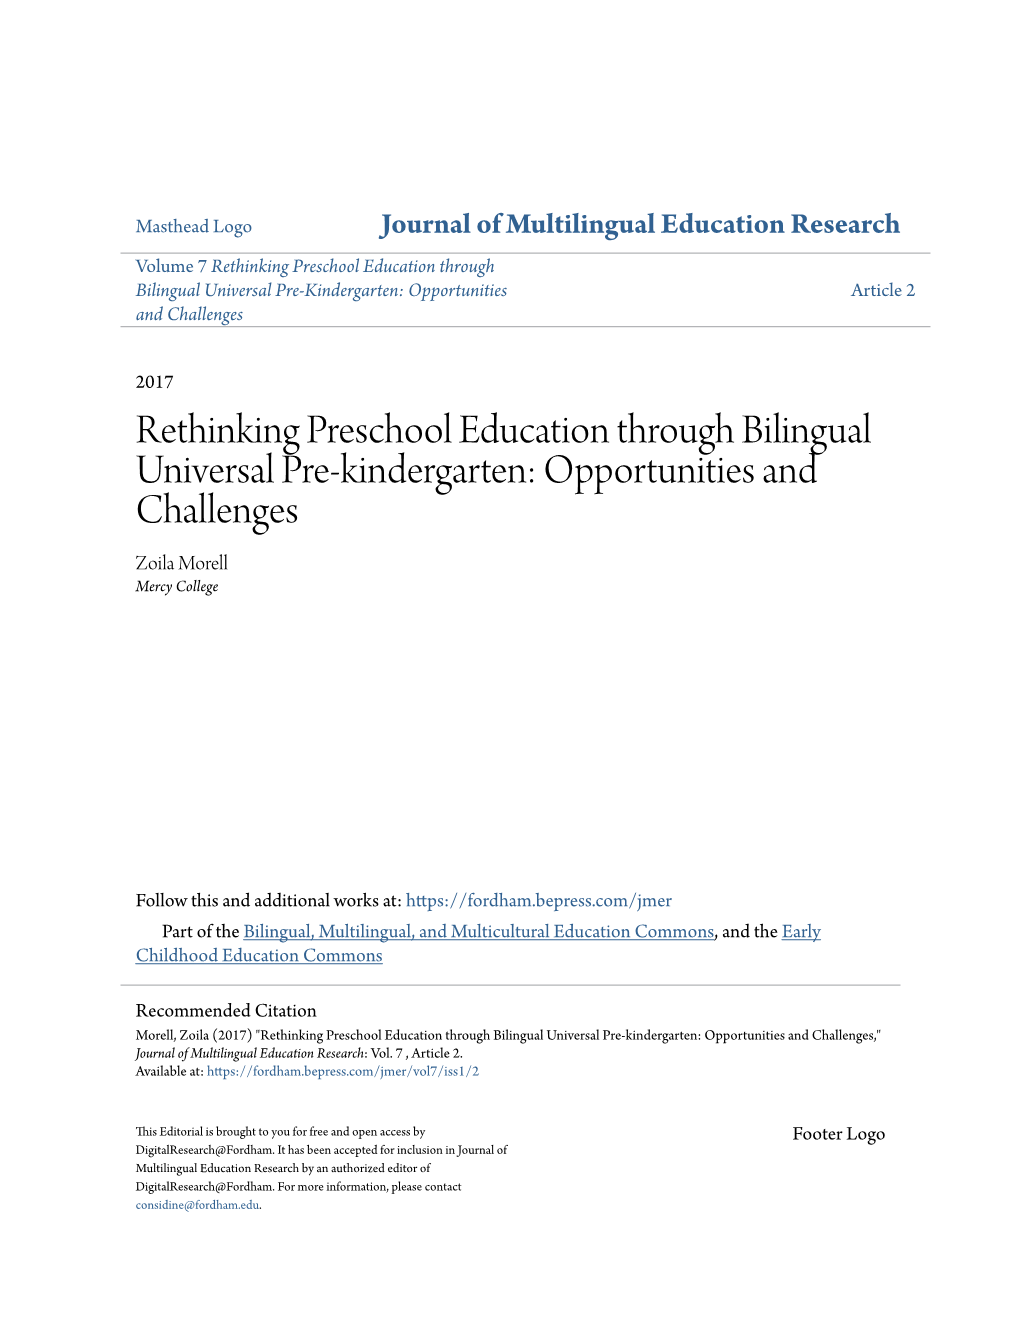 Rethinking Preschool Education Through Bilingual Universal Pre-Kindergarten: Opportunities Article 2 and Challenges